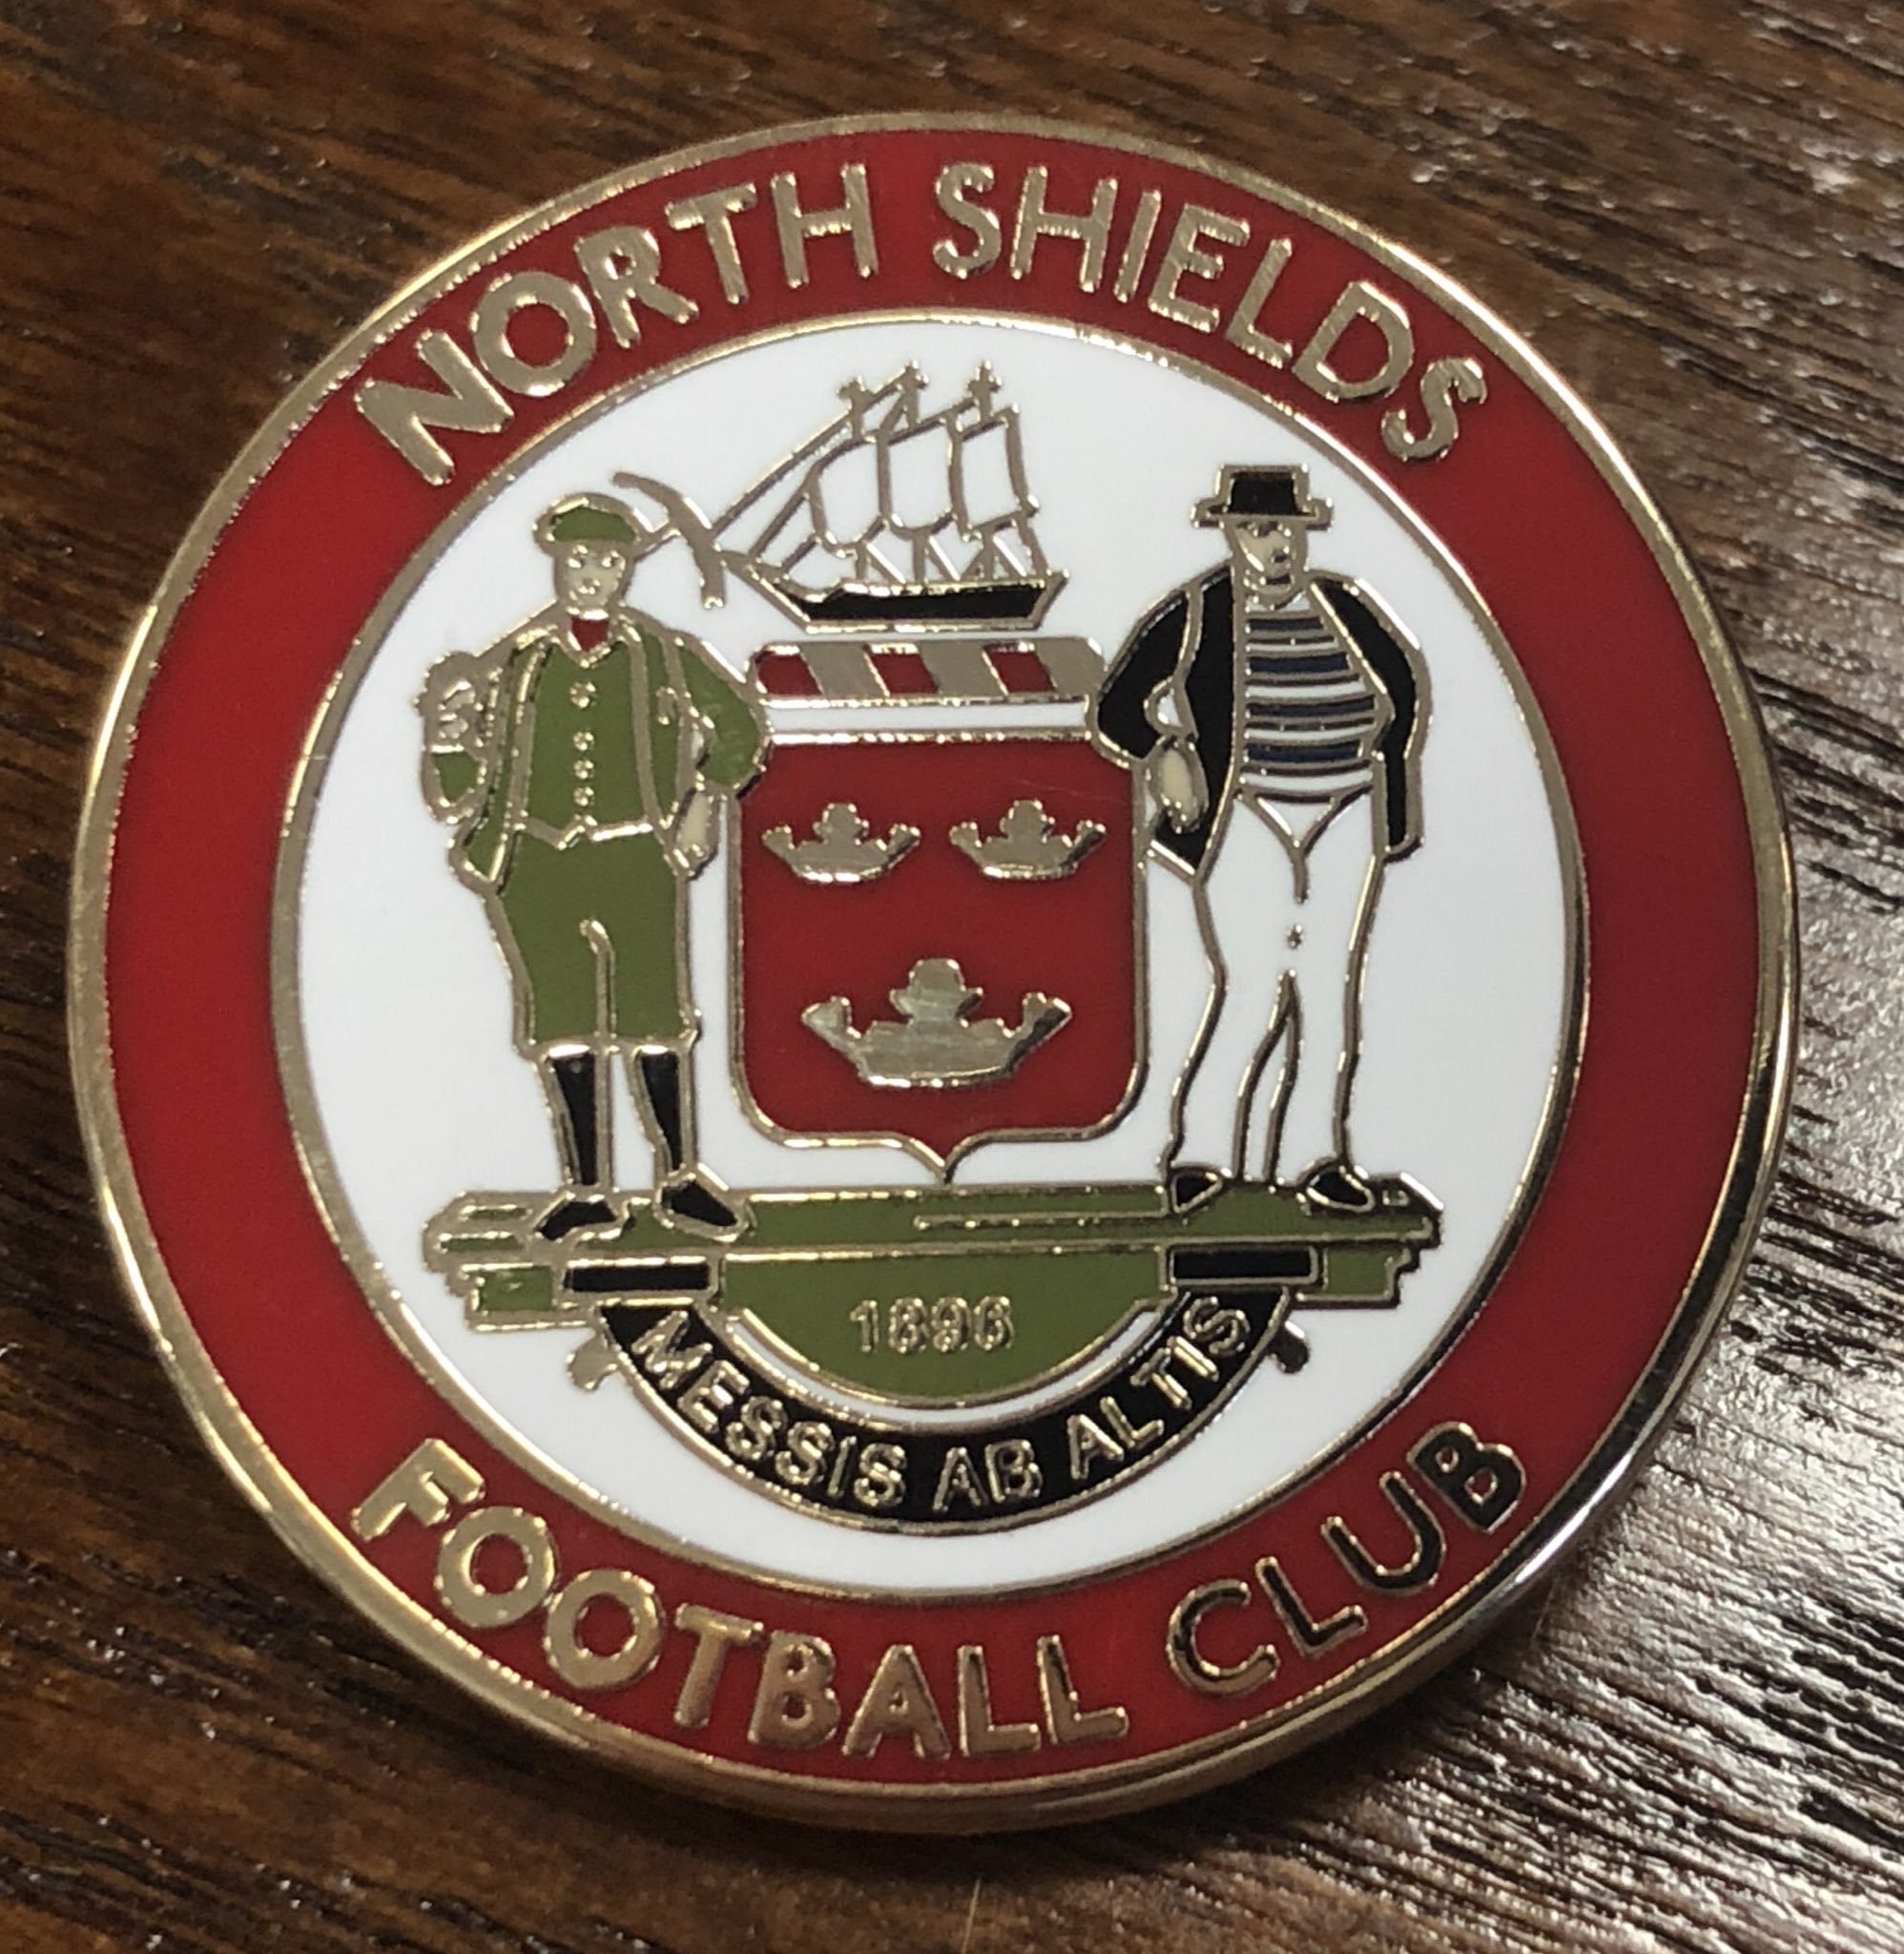 North Shields FC Pin Badge (Red)